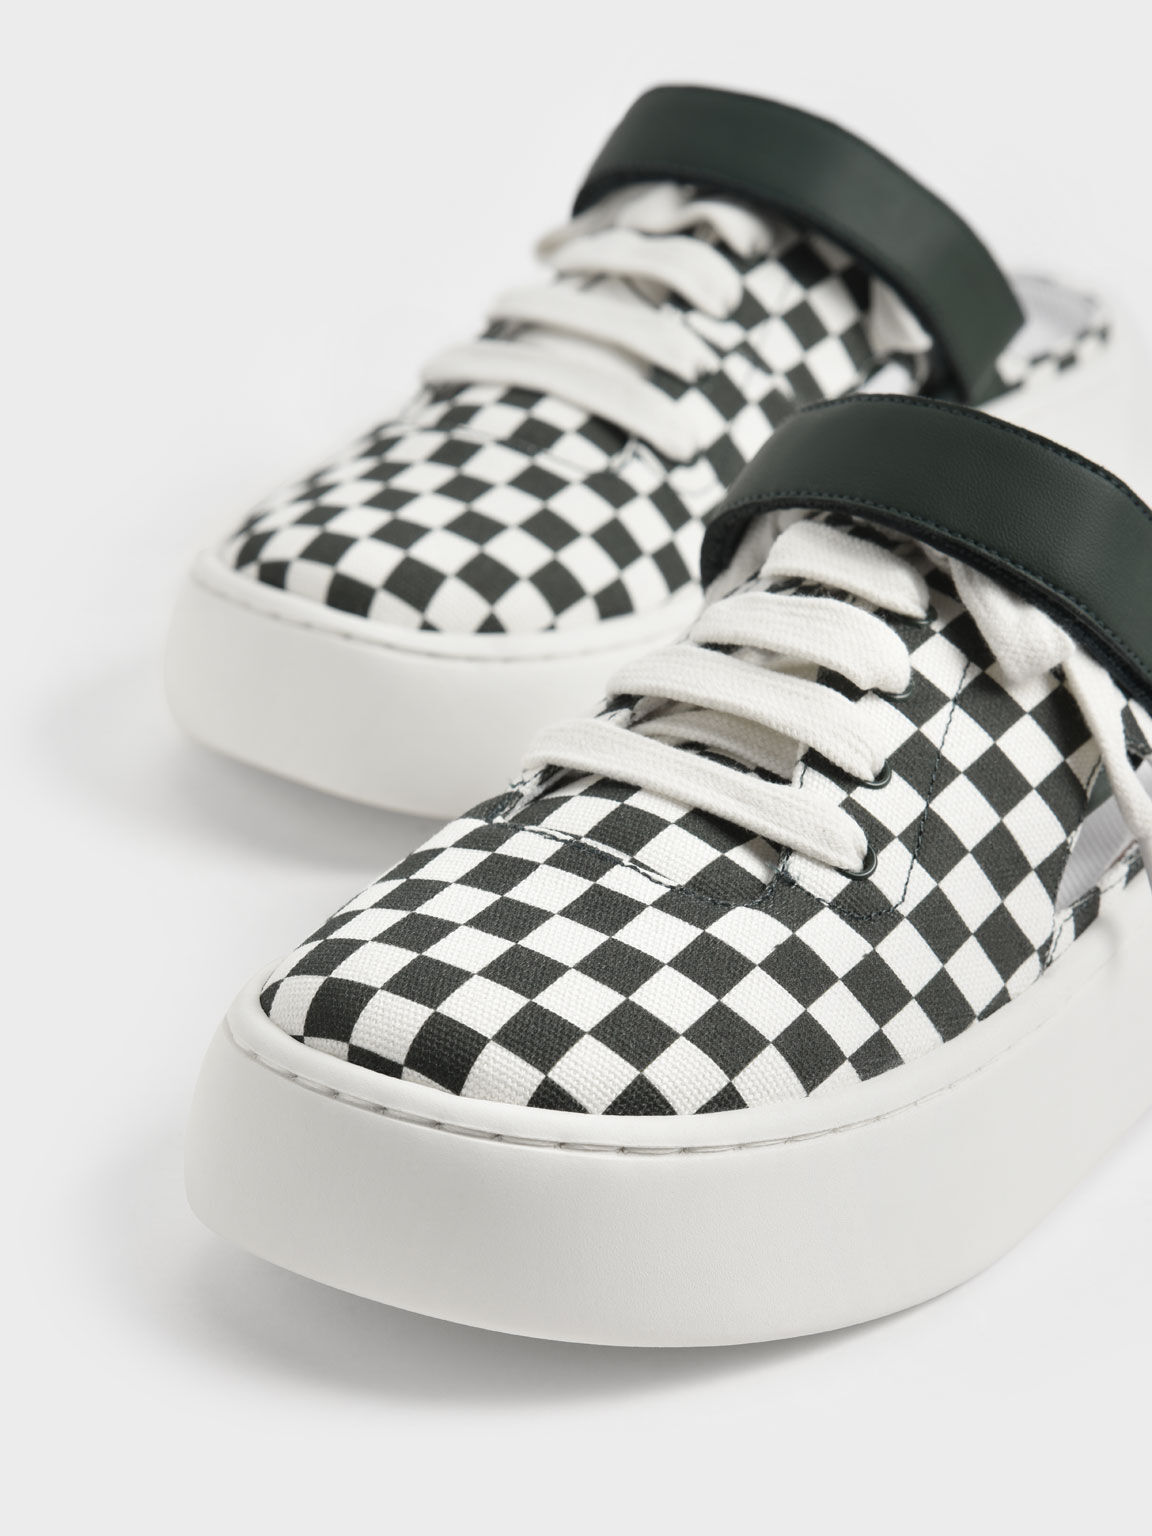 Skye Checkered Canvas Lace-Up Sneaker Mules, Dark Green, hi-res